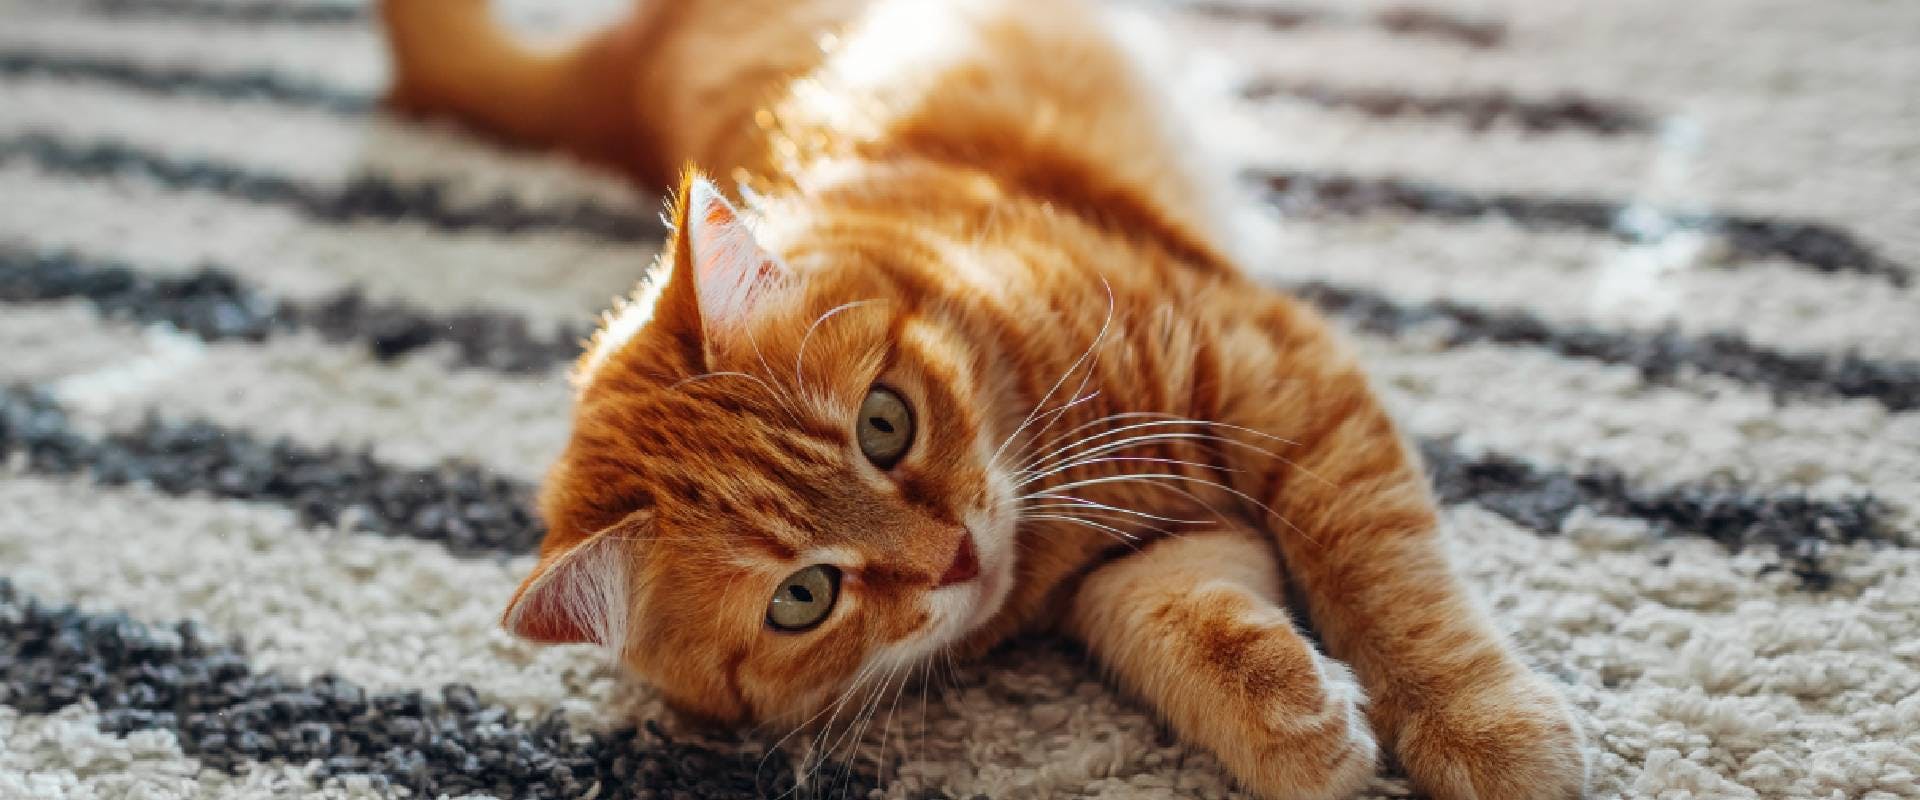 Ginger cat playing on a rug